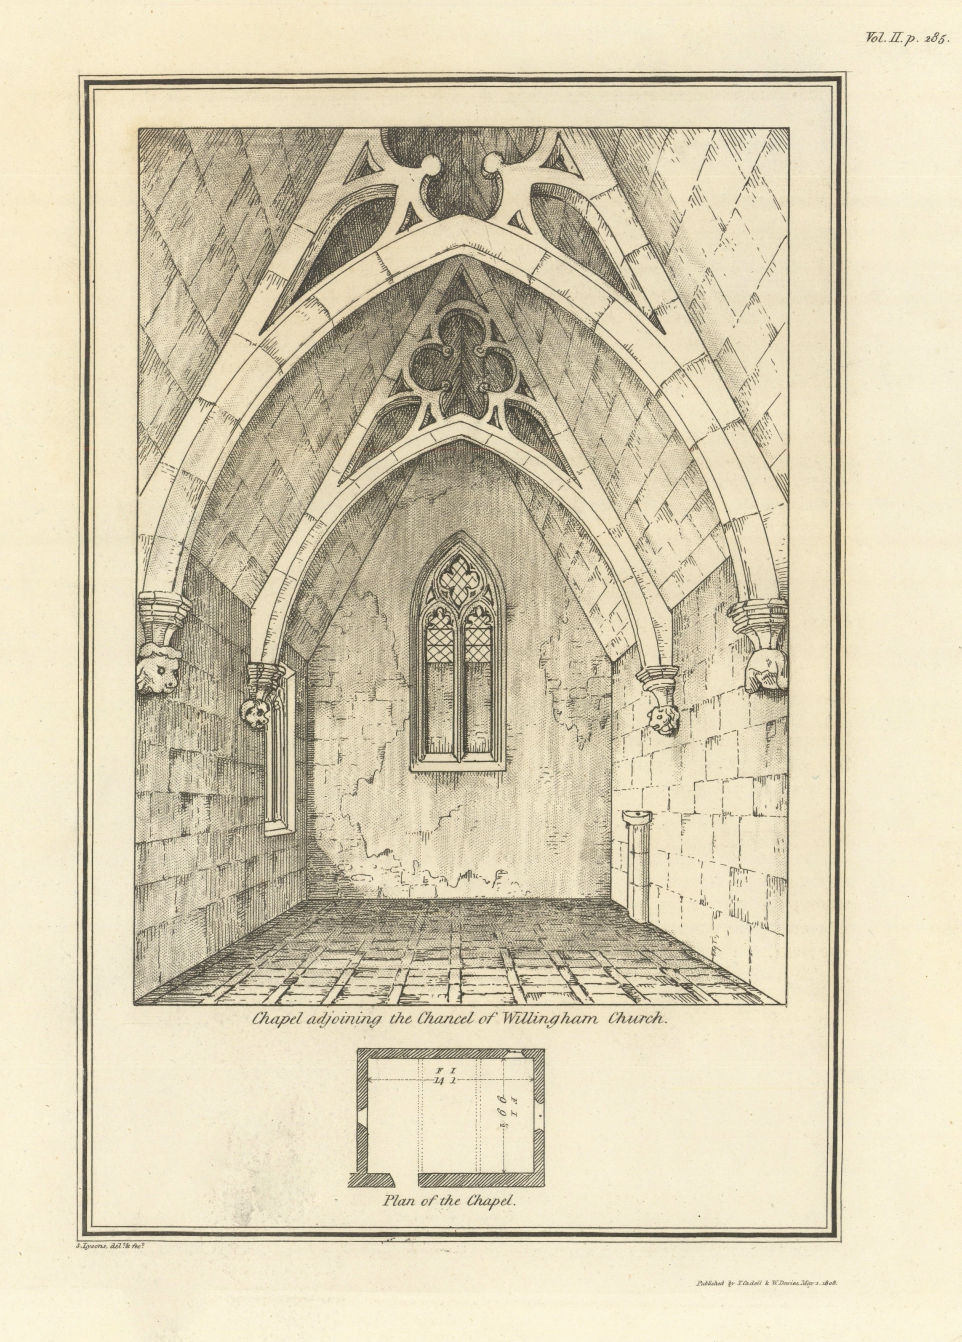 Associate Product Chapel adjoining the Chancel of Willingham Church. LYSONS 1810 old print